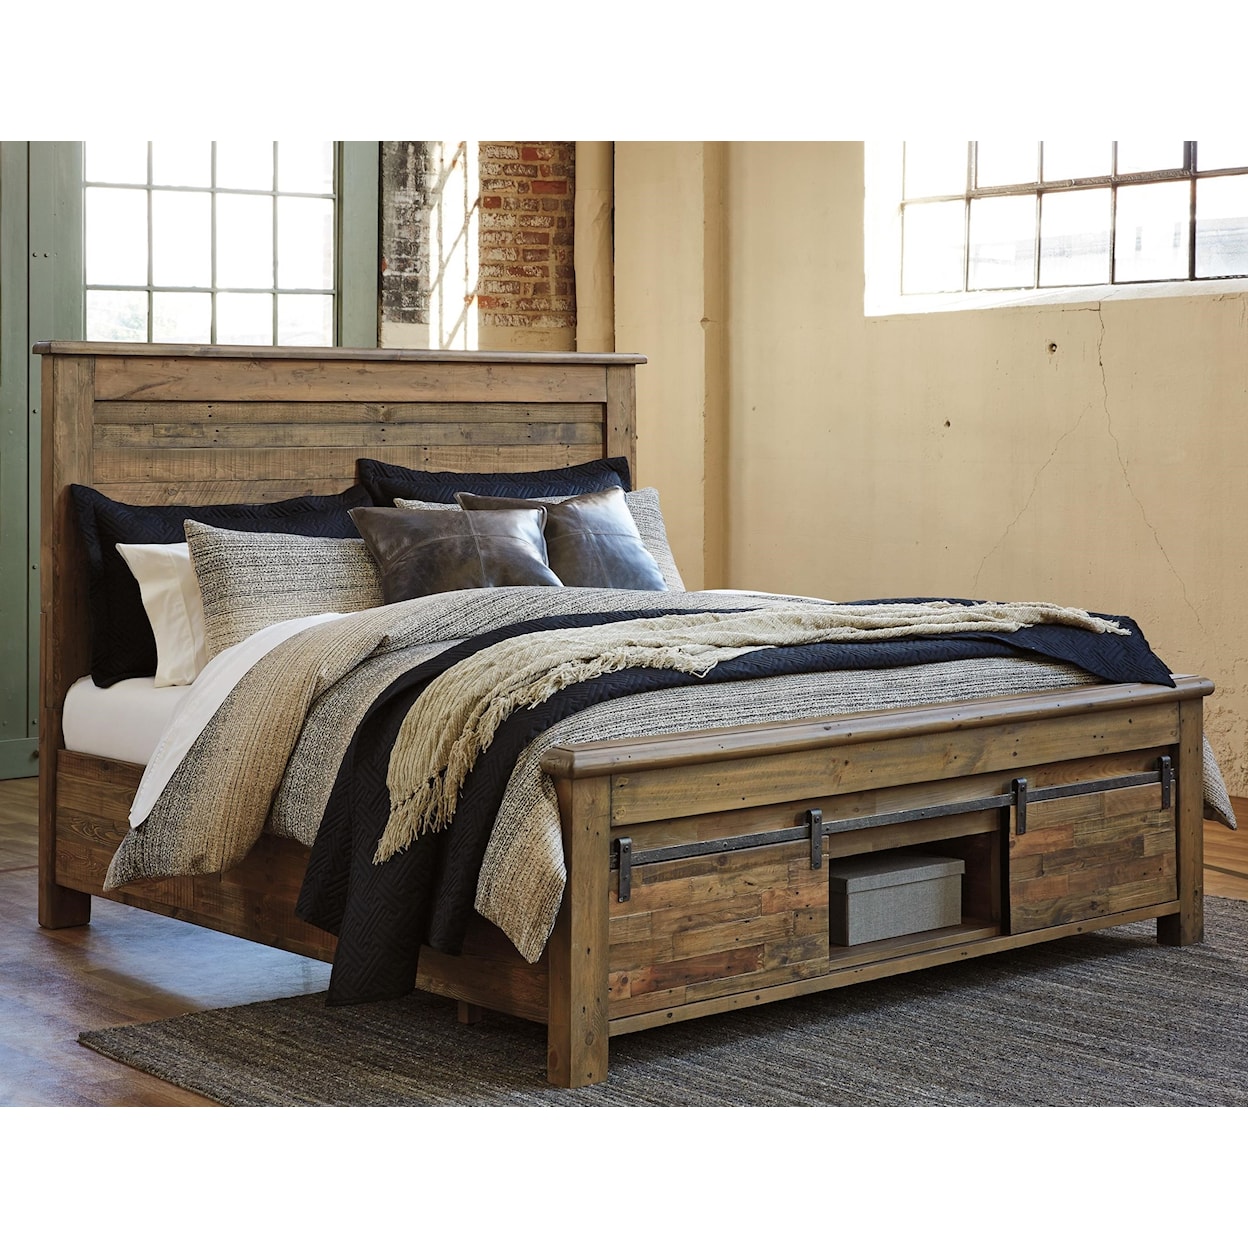 Signature Design by Ashley Sommerford King Panel Storage Bed